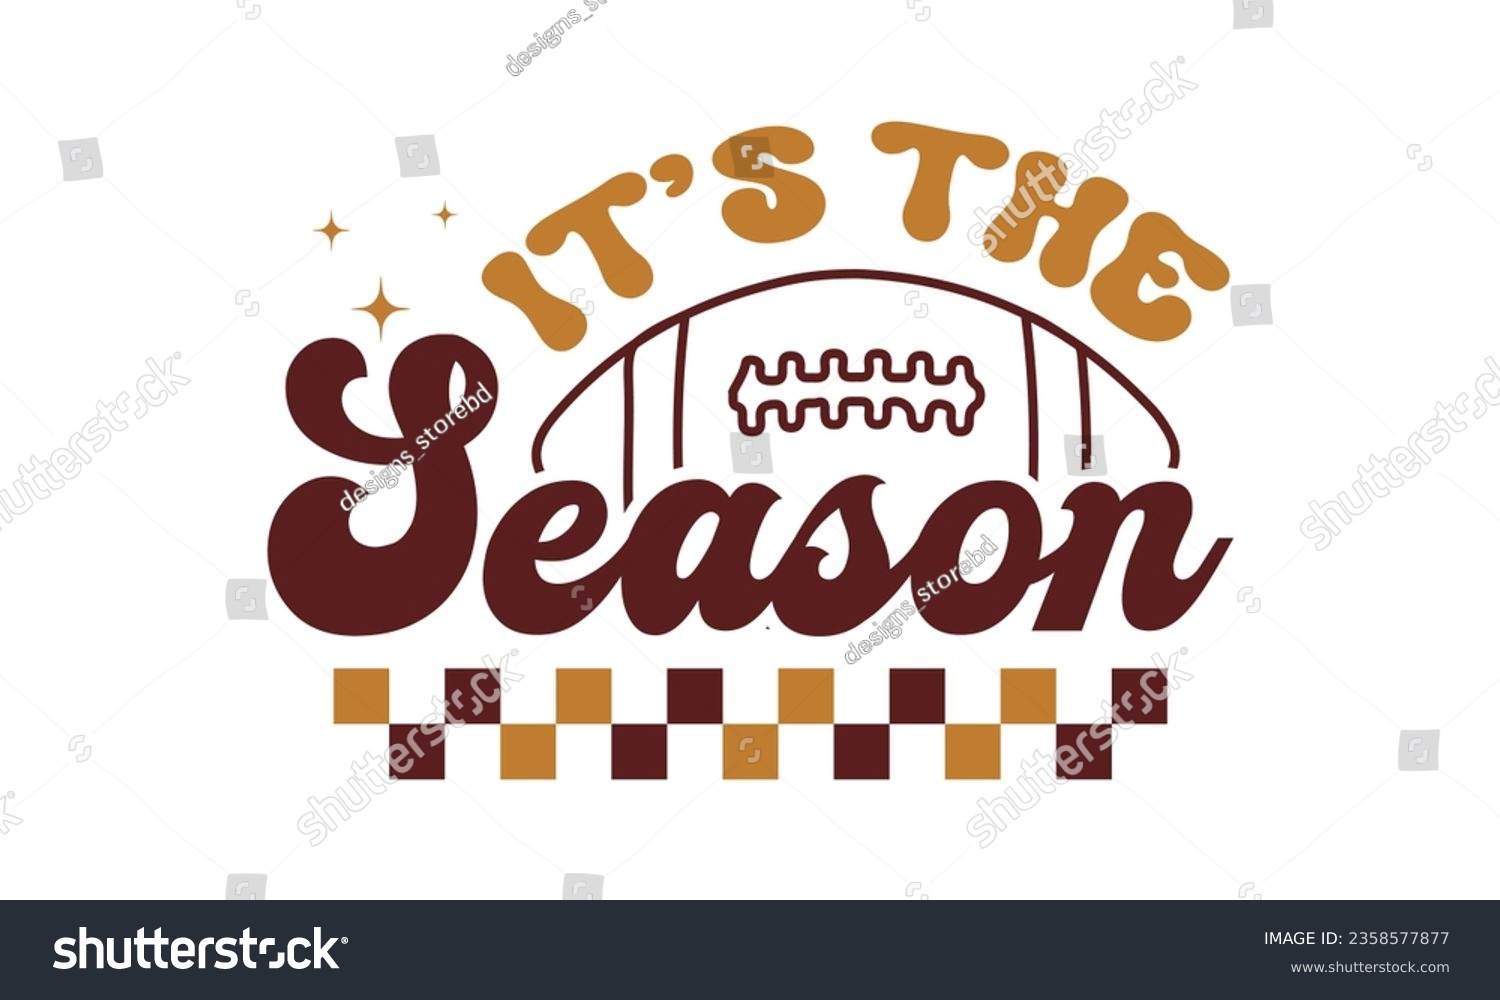 SVG of It's the season svg, Football SVG, Football T-shirt Design Template SVG Cut File Typography, Files for Cutting Cricut and Silhouette Cut svg File, Game Day eps, png svg